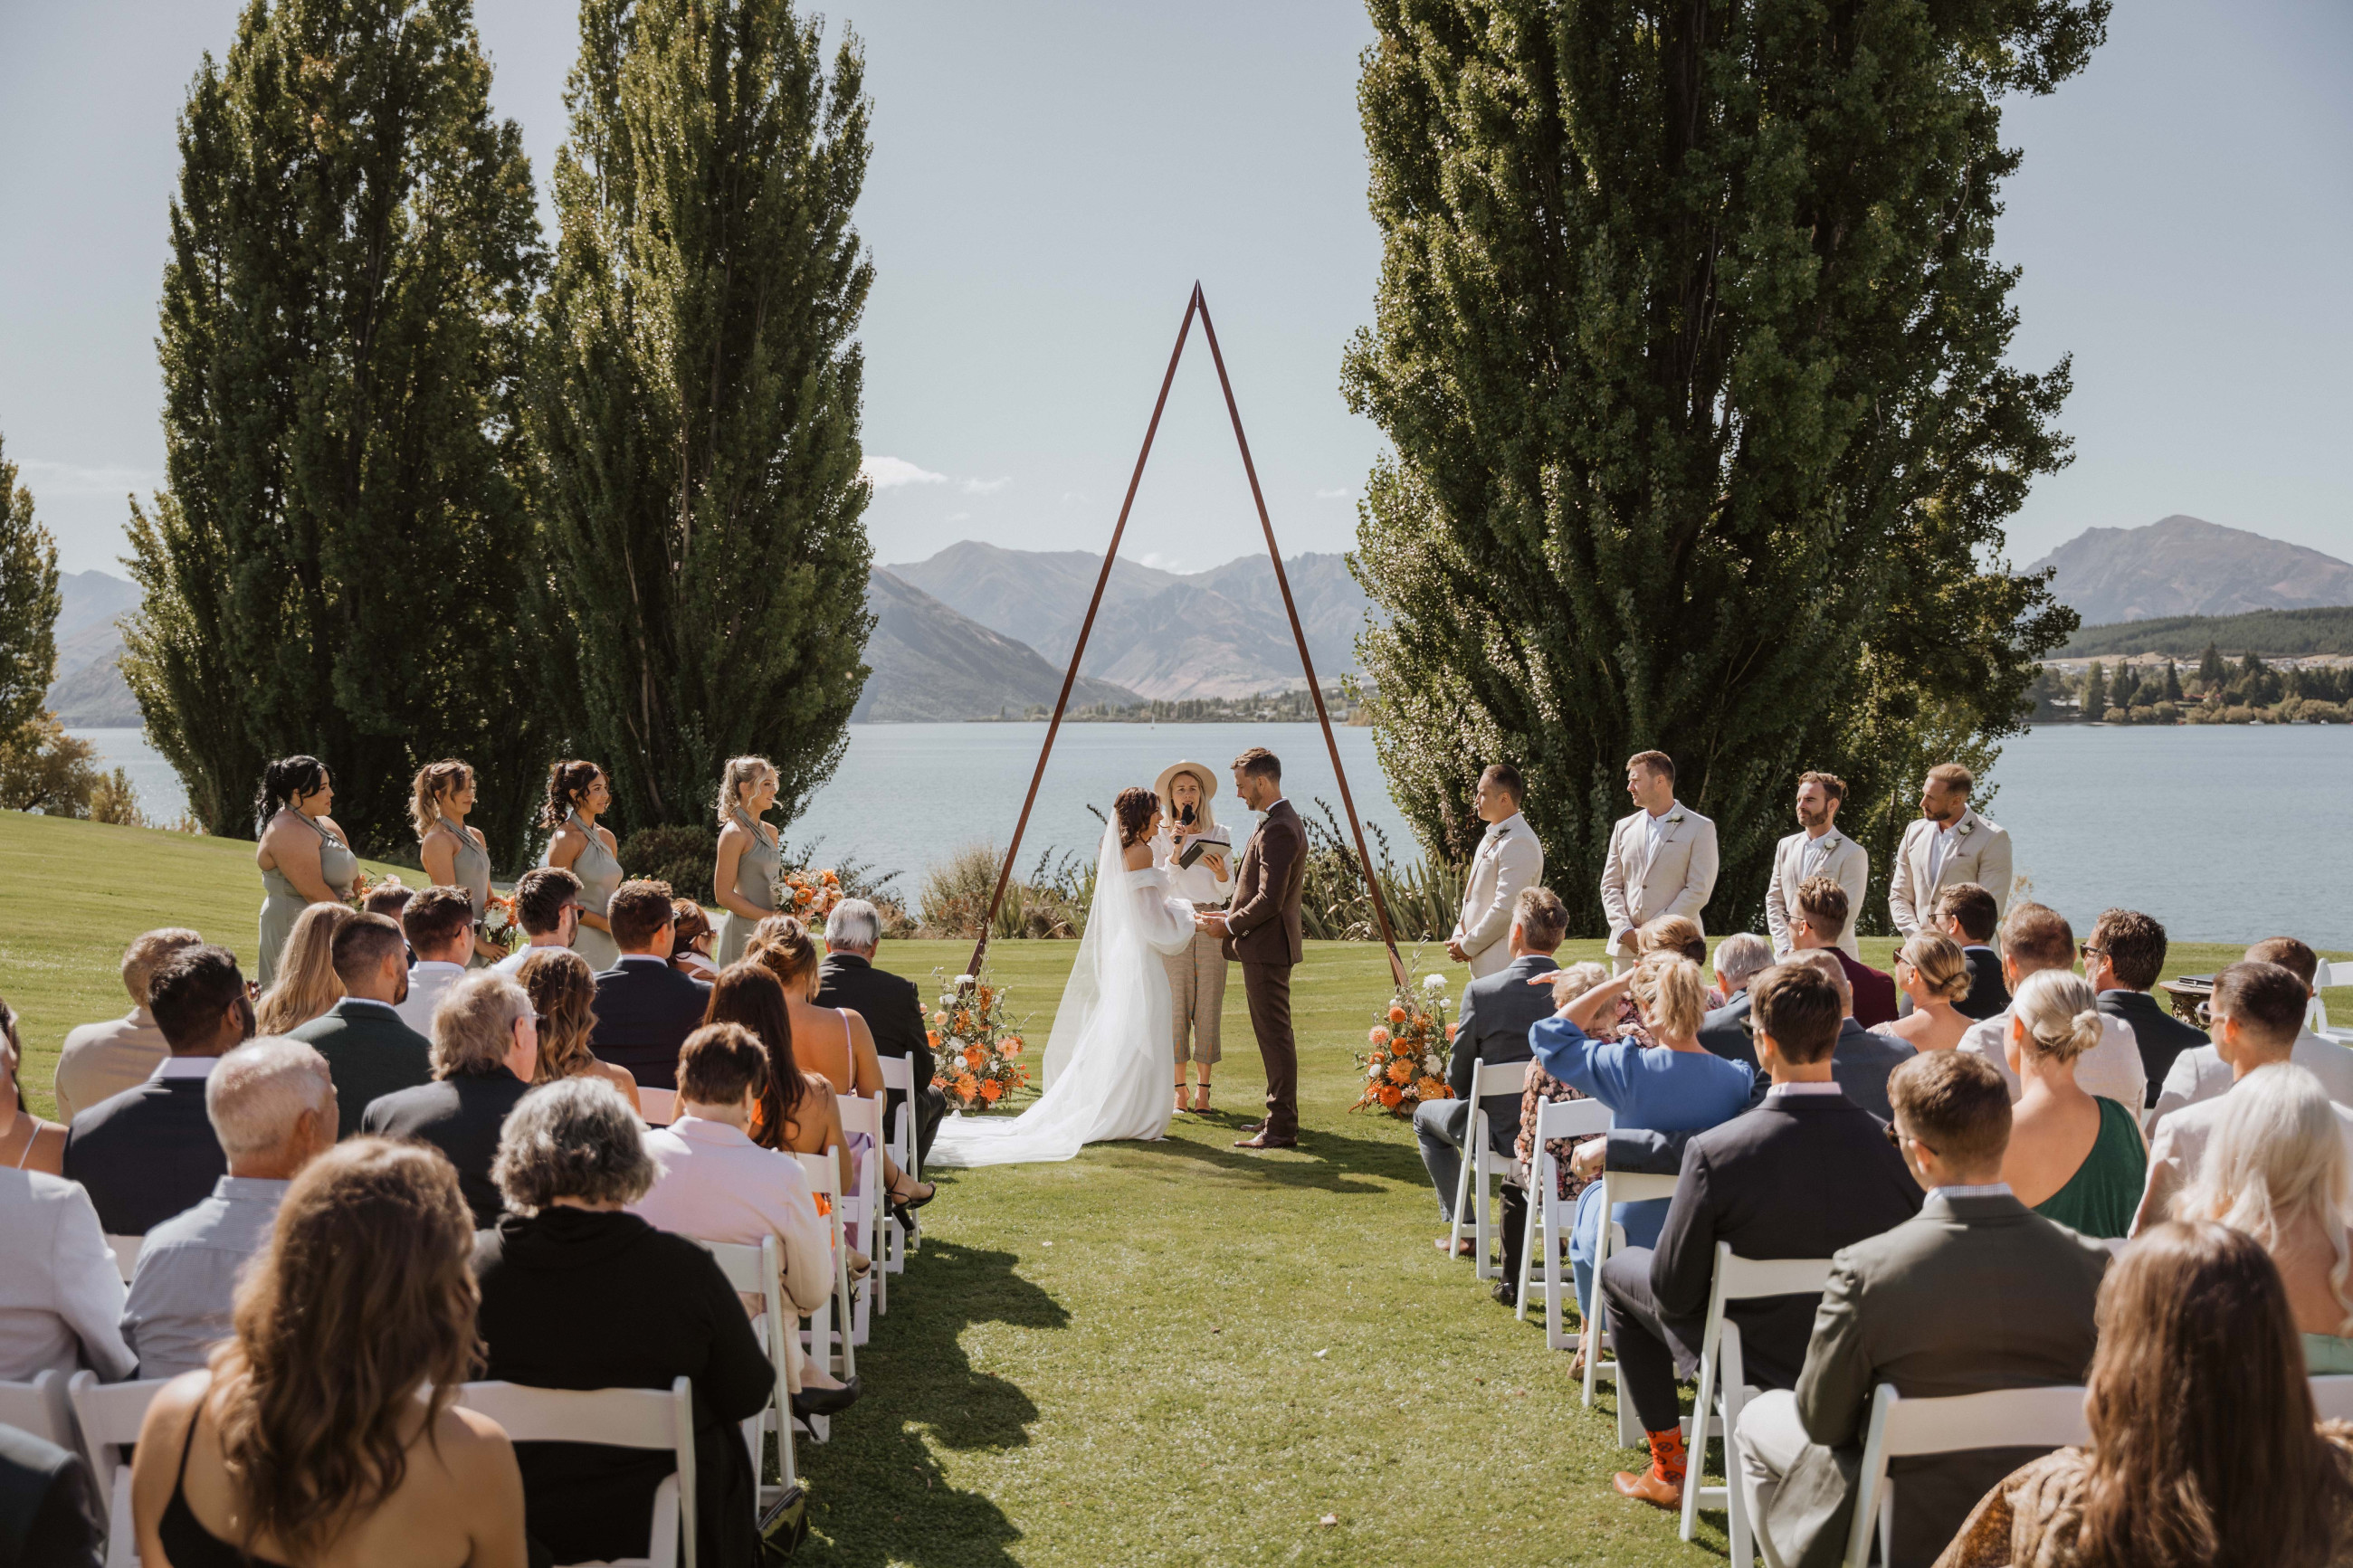 A&J are one of the Wanaka wedding venues